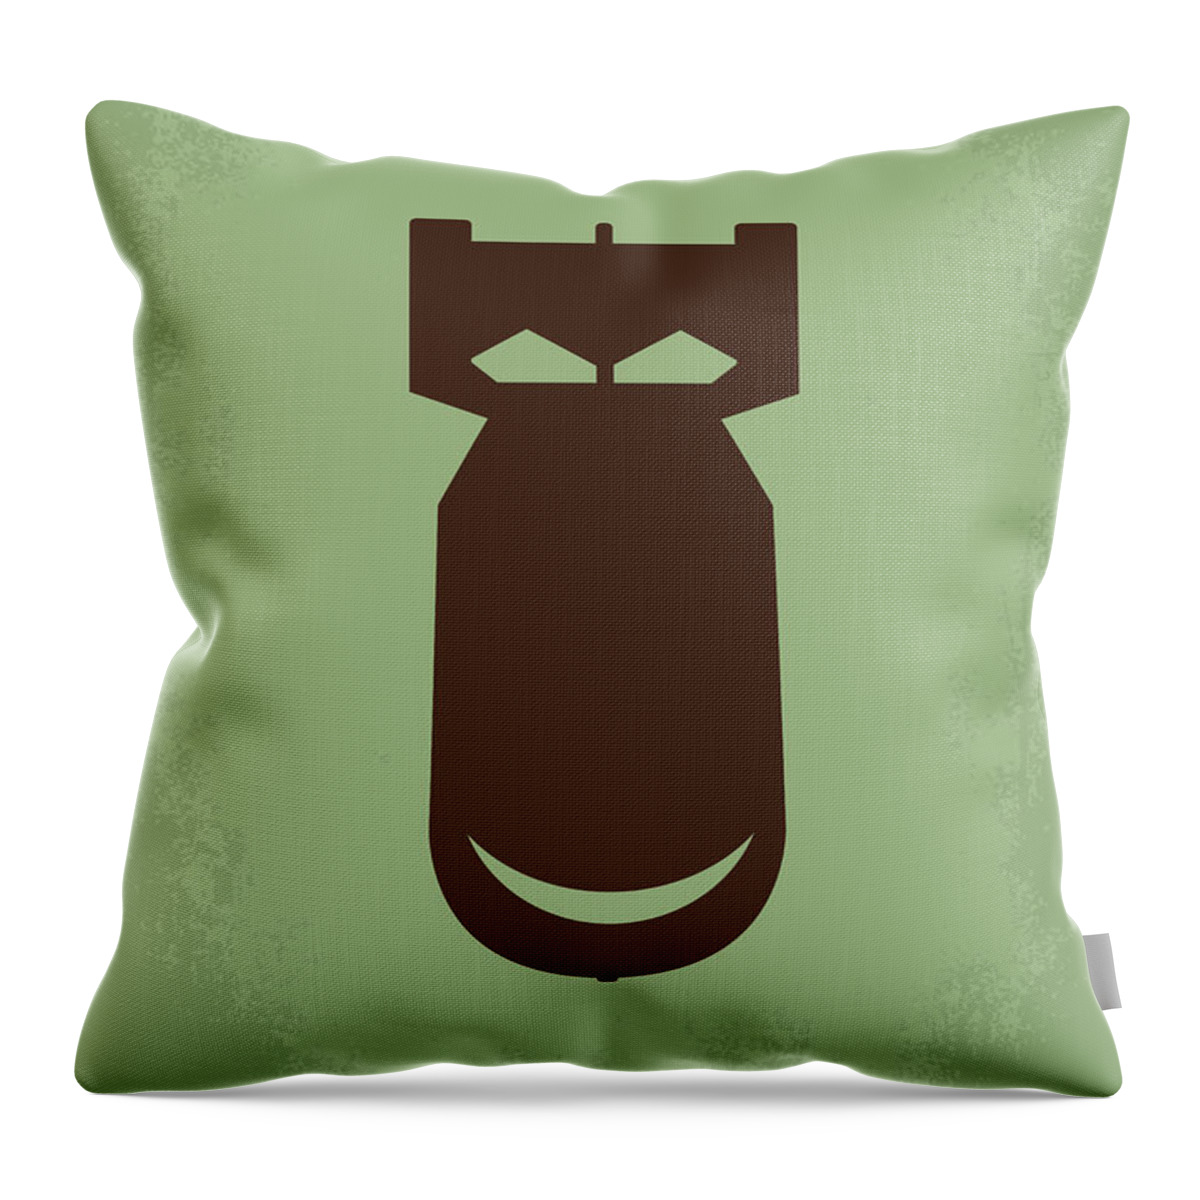 The Throw Pillow featuring the digital art No212 My The Dictator minimal movie poster by Chungkong Art